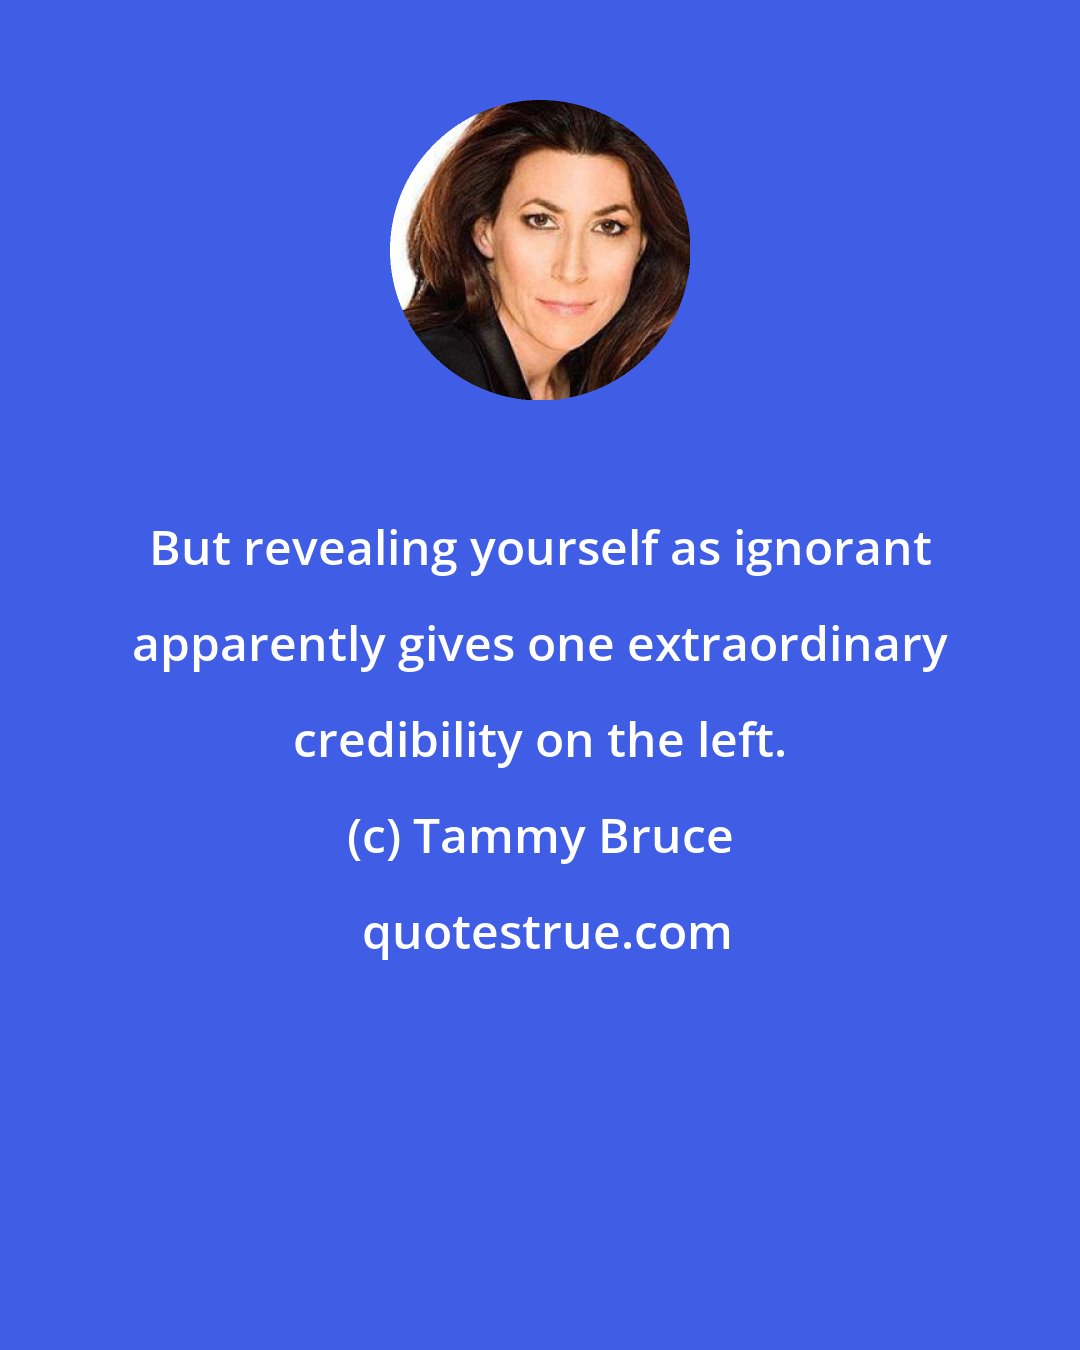 Tammy Bruce: But revealing yourself as ignorant apparently gives one extraordinary credibility on the left.